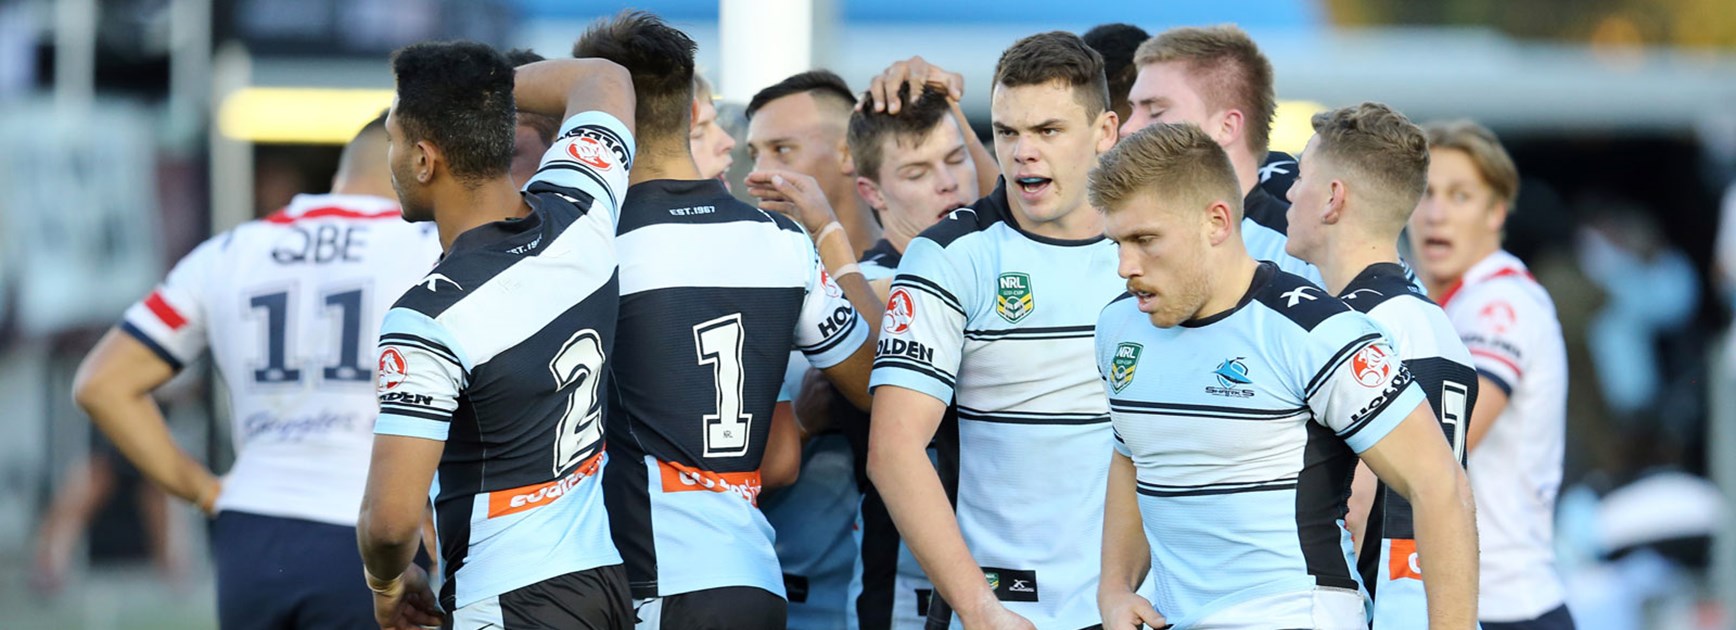 The Sharks NYC side enjoyed a tight victory over the Roosters in Round 25.